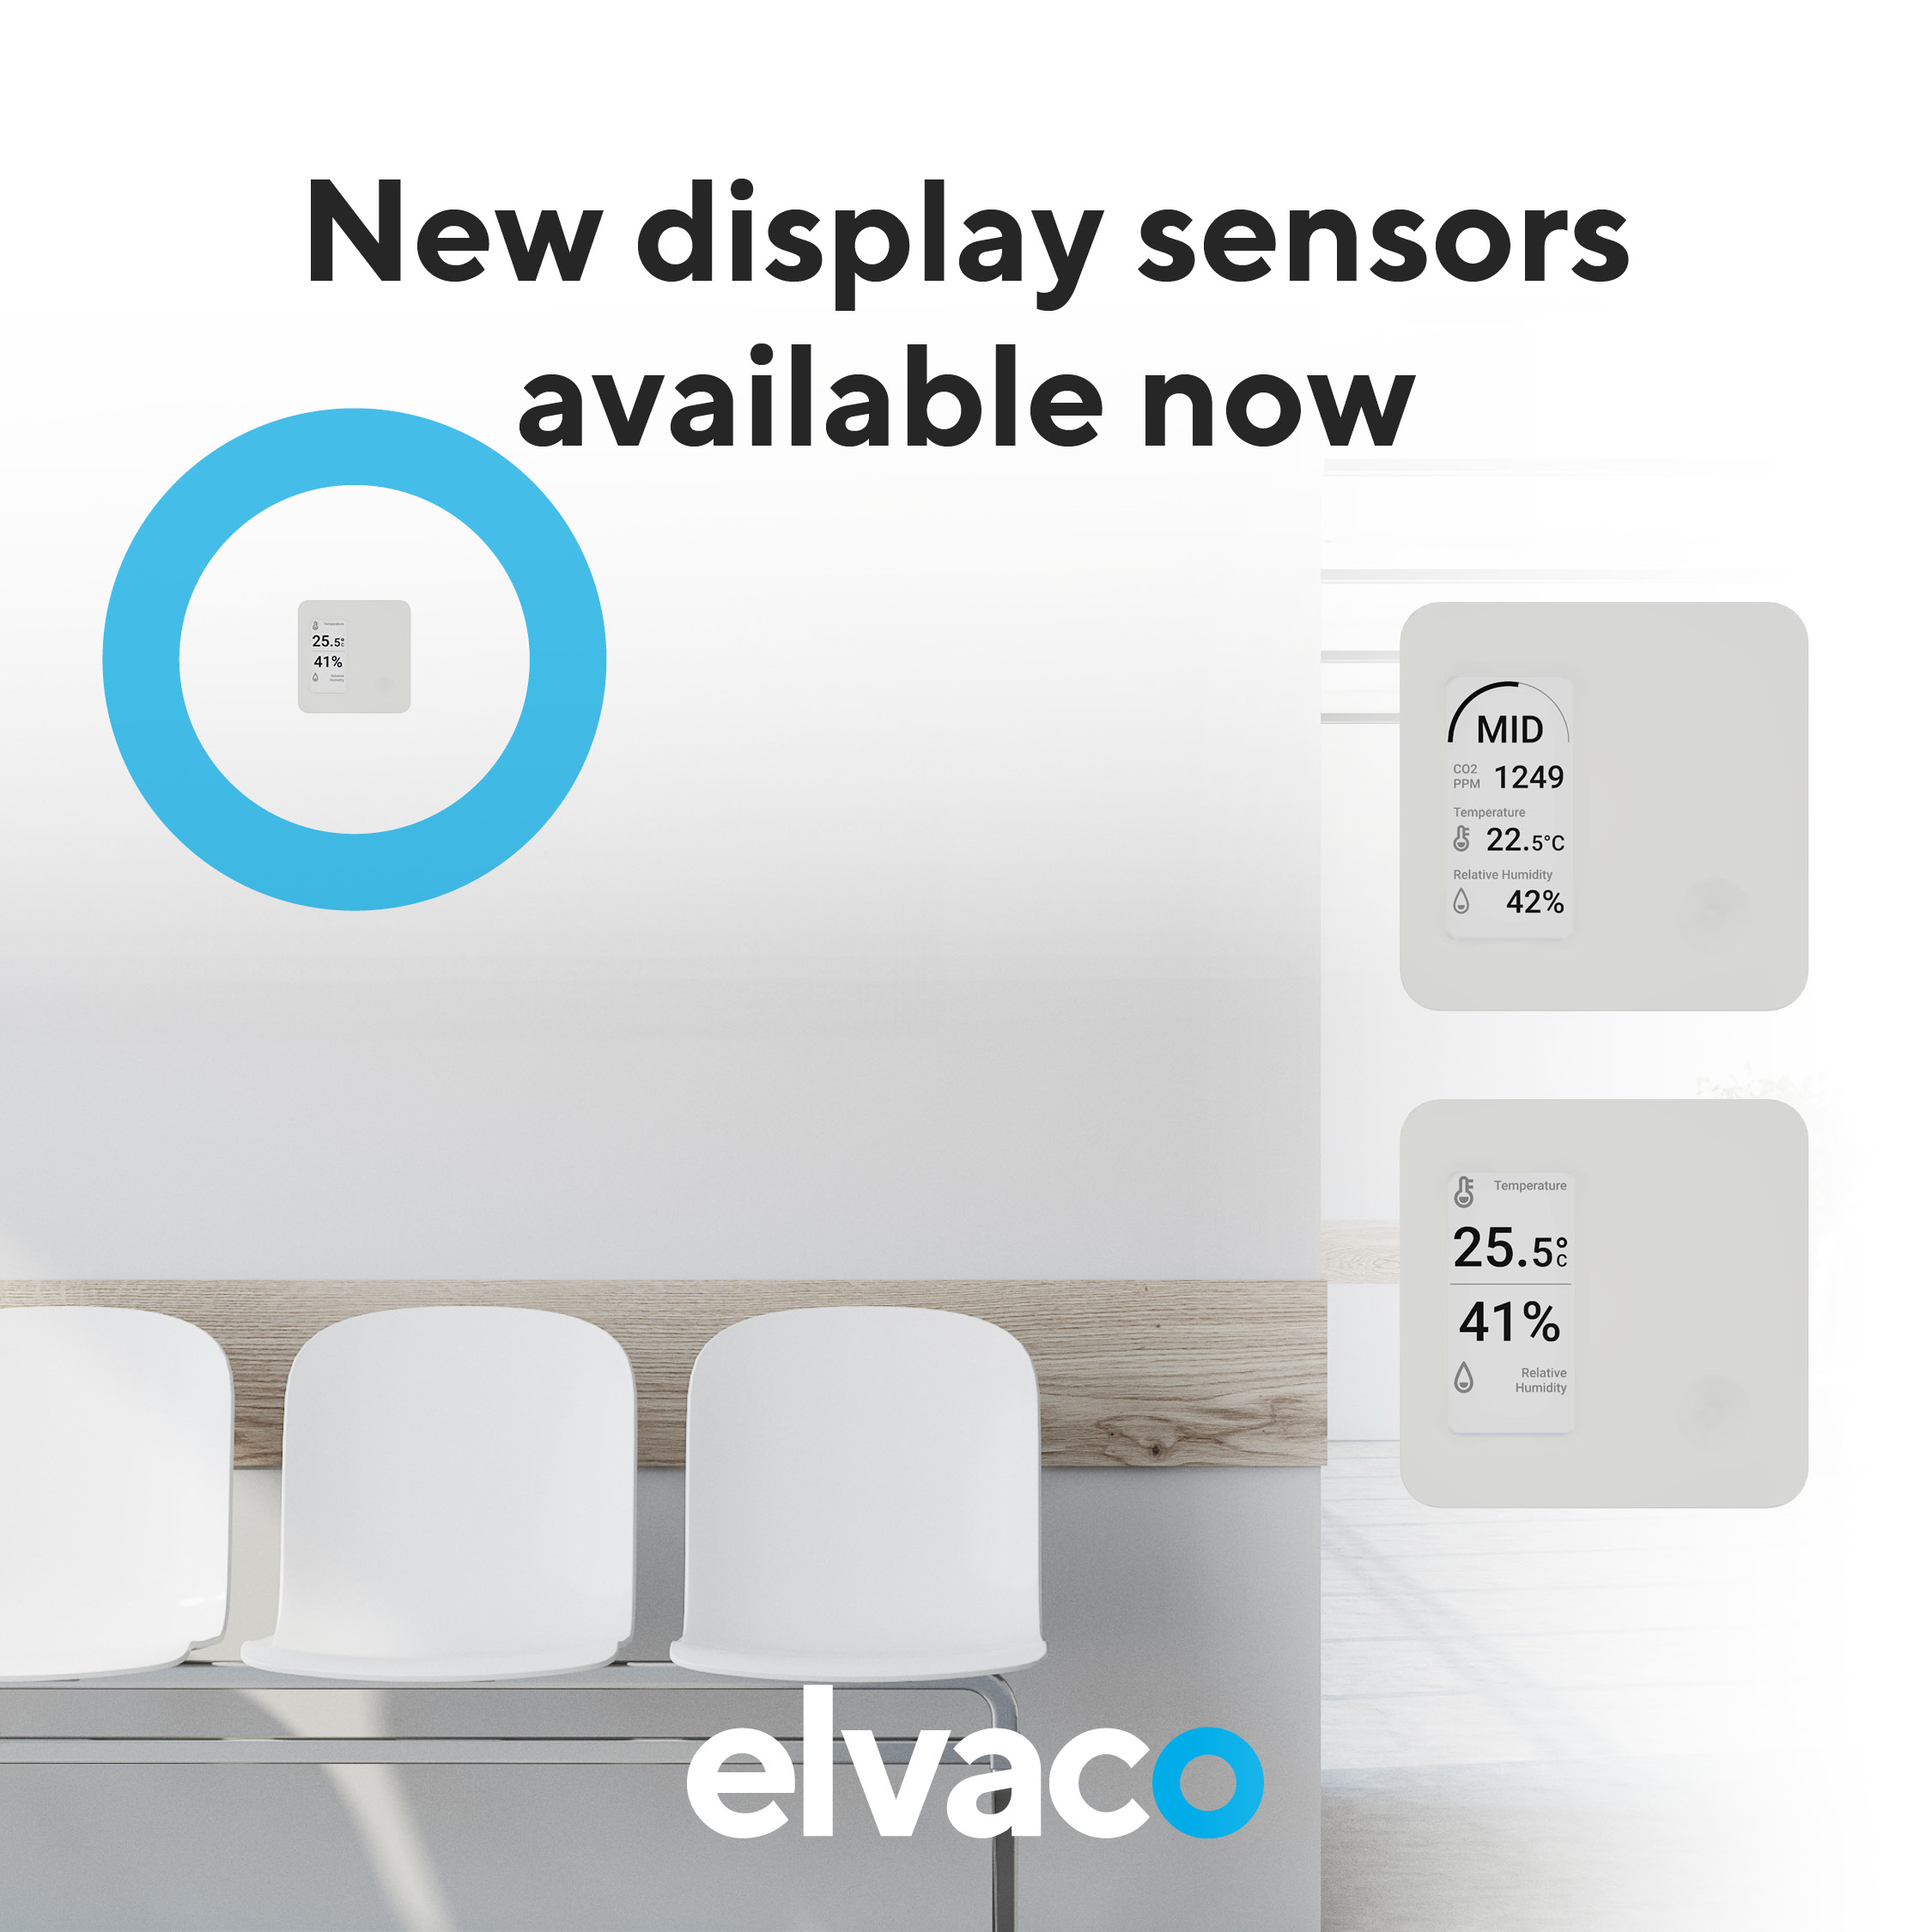 Available now - new LoRaWAN sensors with display